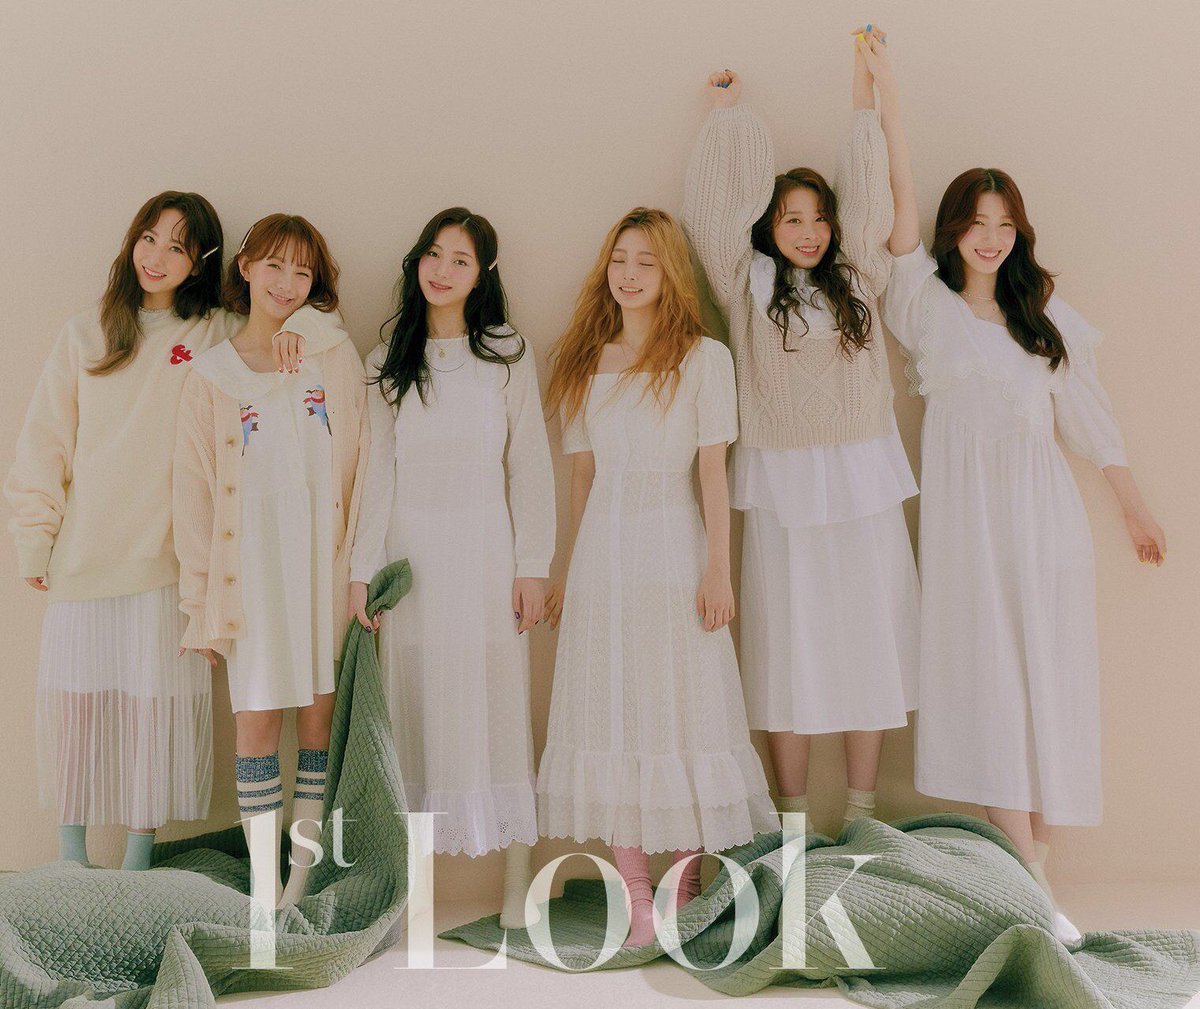 I found these girls around the week of their debut and thought they were the cutest thing and loved bbb, then i found their rv cover stage and really decided to stan. Ive now watched around every official woollim video for them and +  #KetchyForRocketPunch